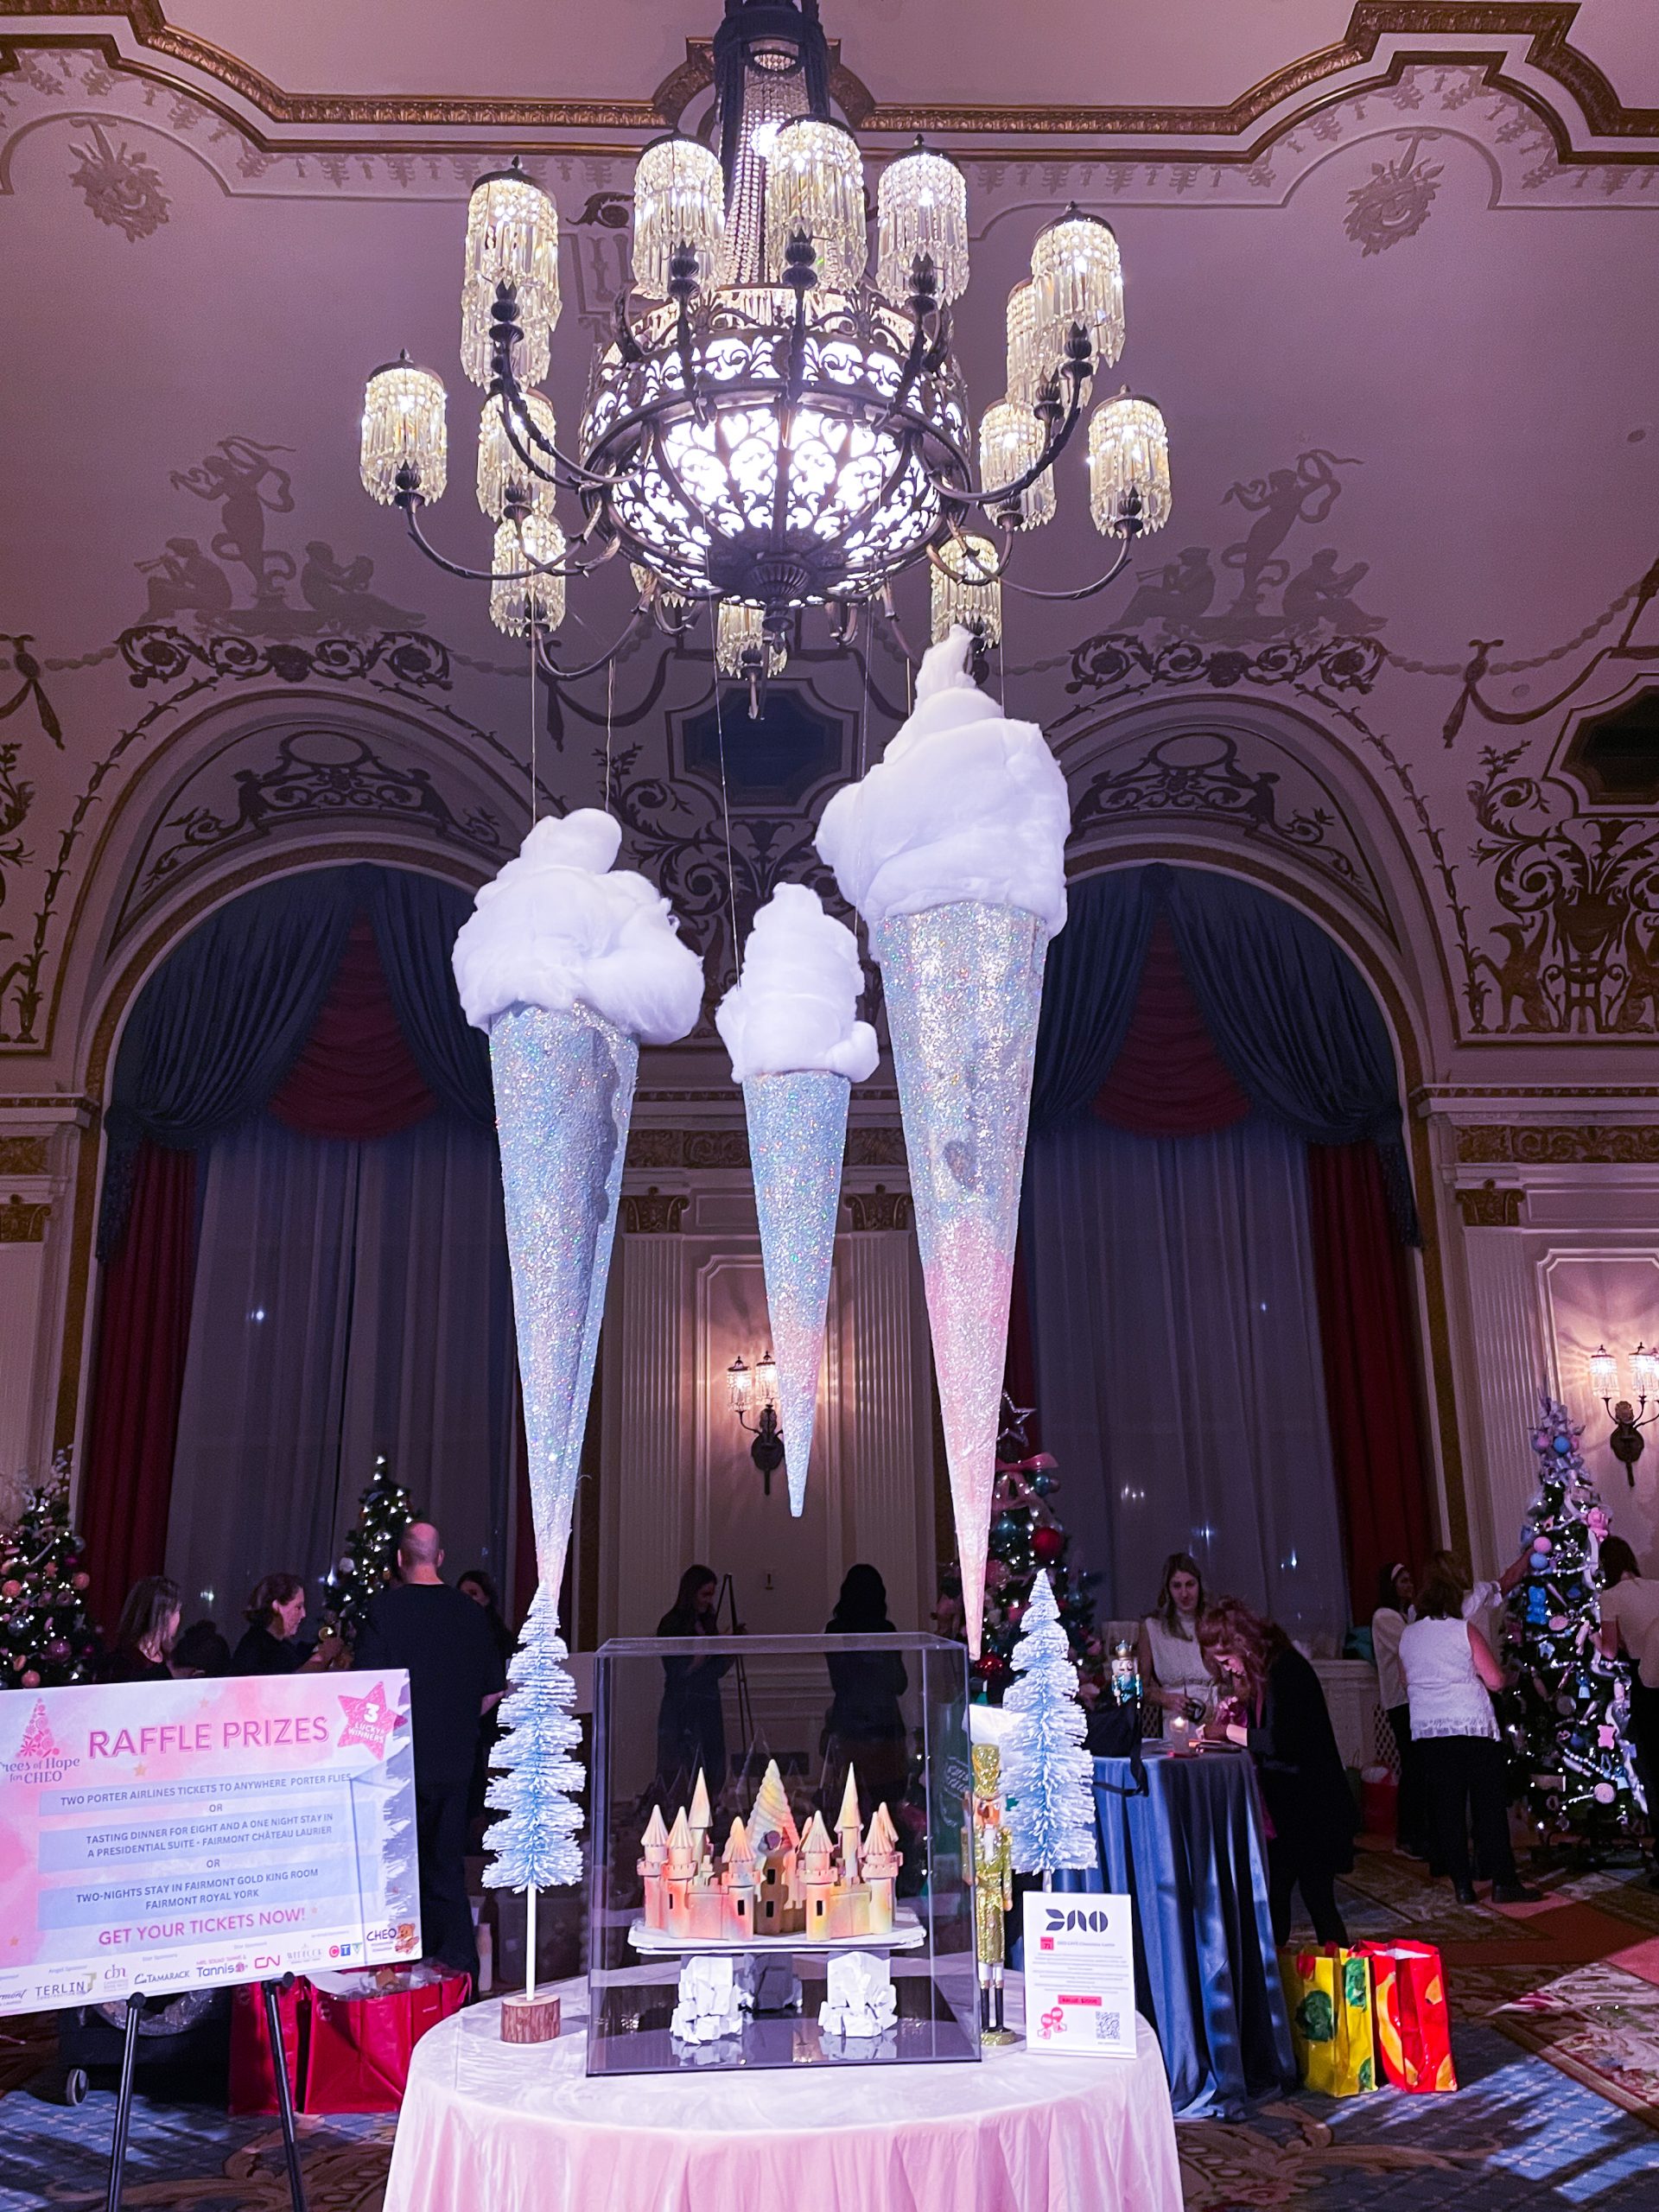 Giant ice cream cones hang from chandelier with custom chocolate castle replication of Fairmont Chateau Laurier